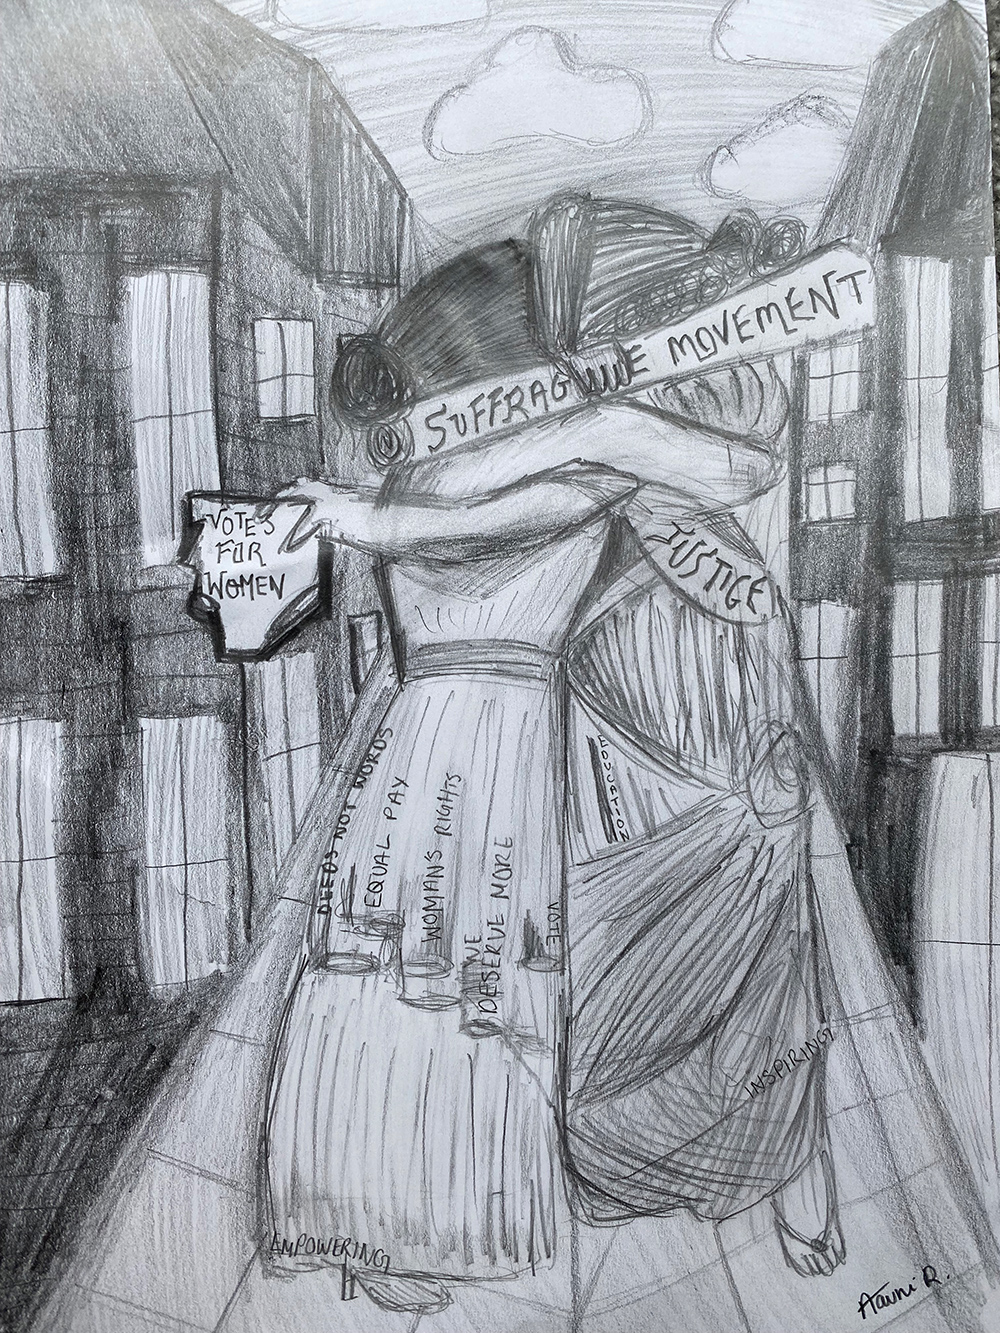 Pencil drawing of two women embracing with a banner saying 'Suffragette movement' over their faces.